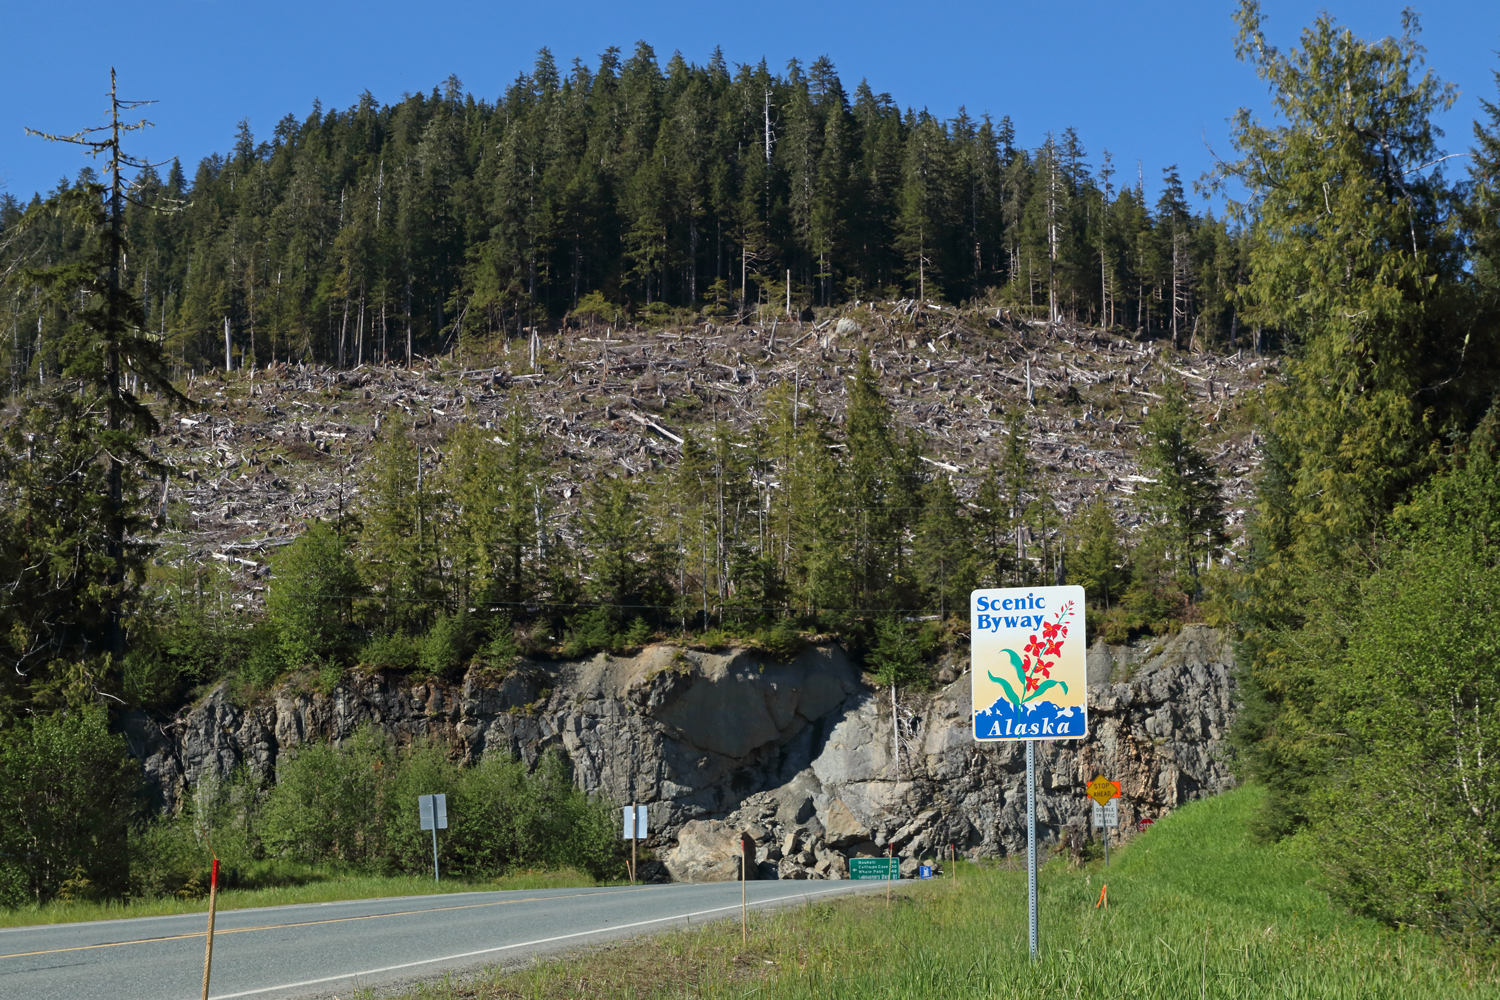 Agencies are sometimes at odds. The Scenic Byway program took a hit when the Alaska Mental Health Trust logged behind the sign.